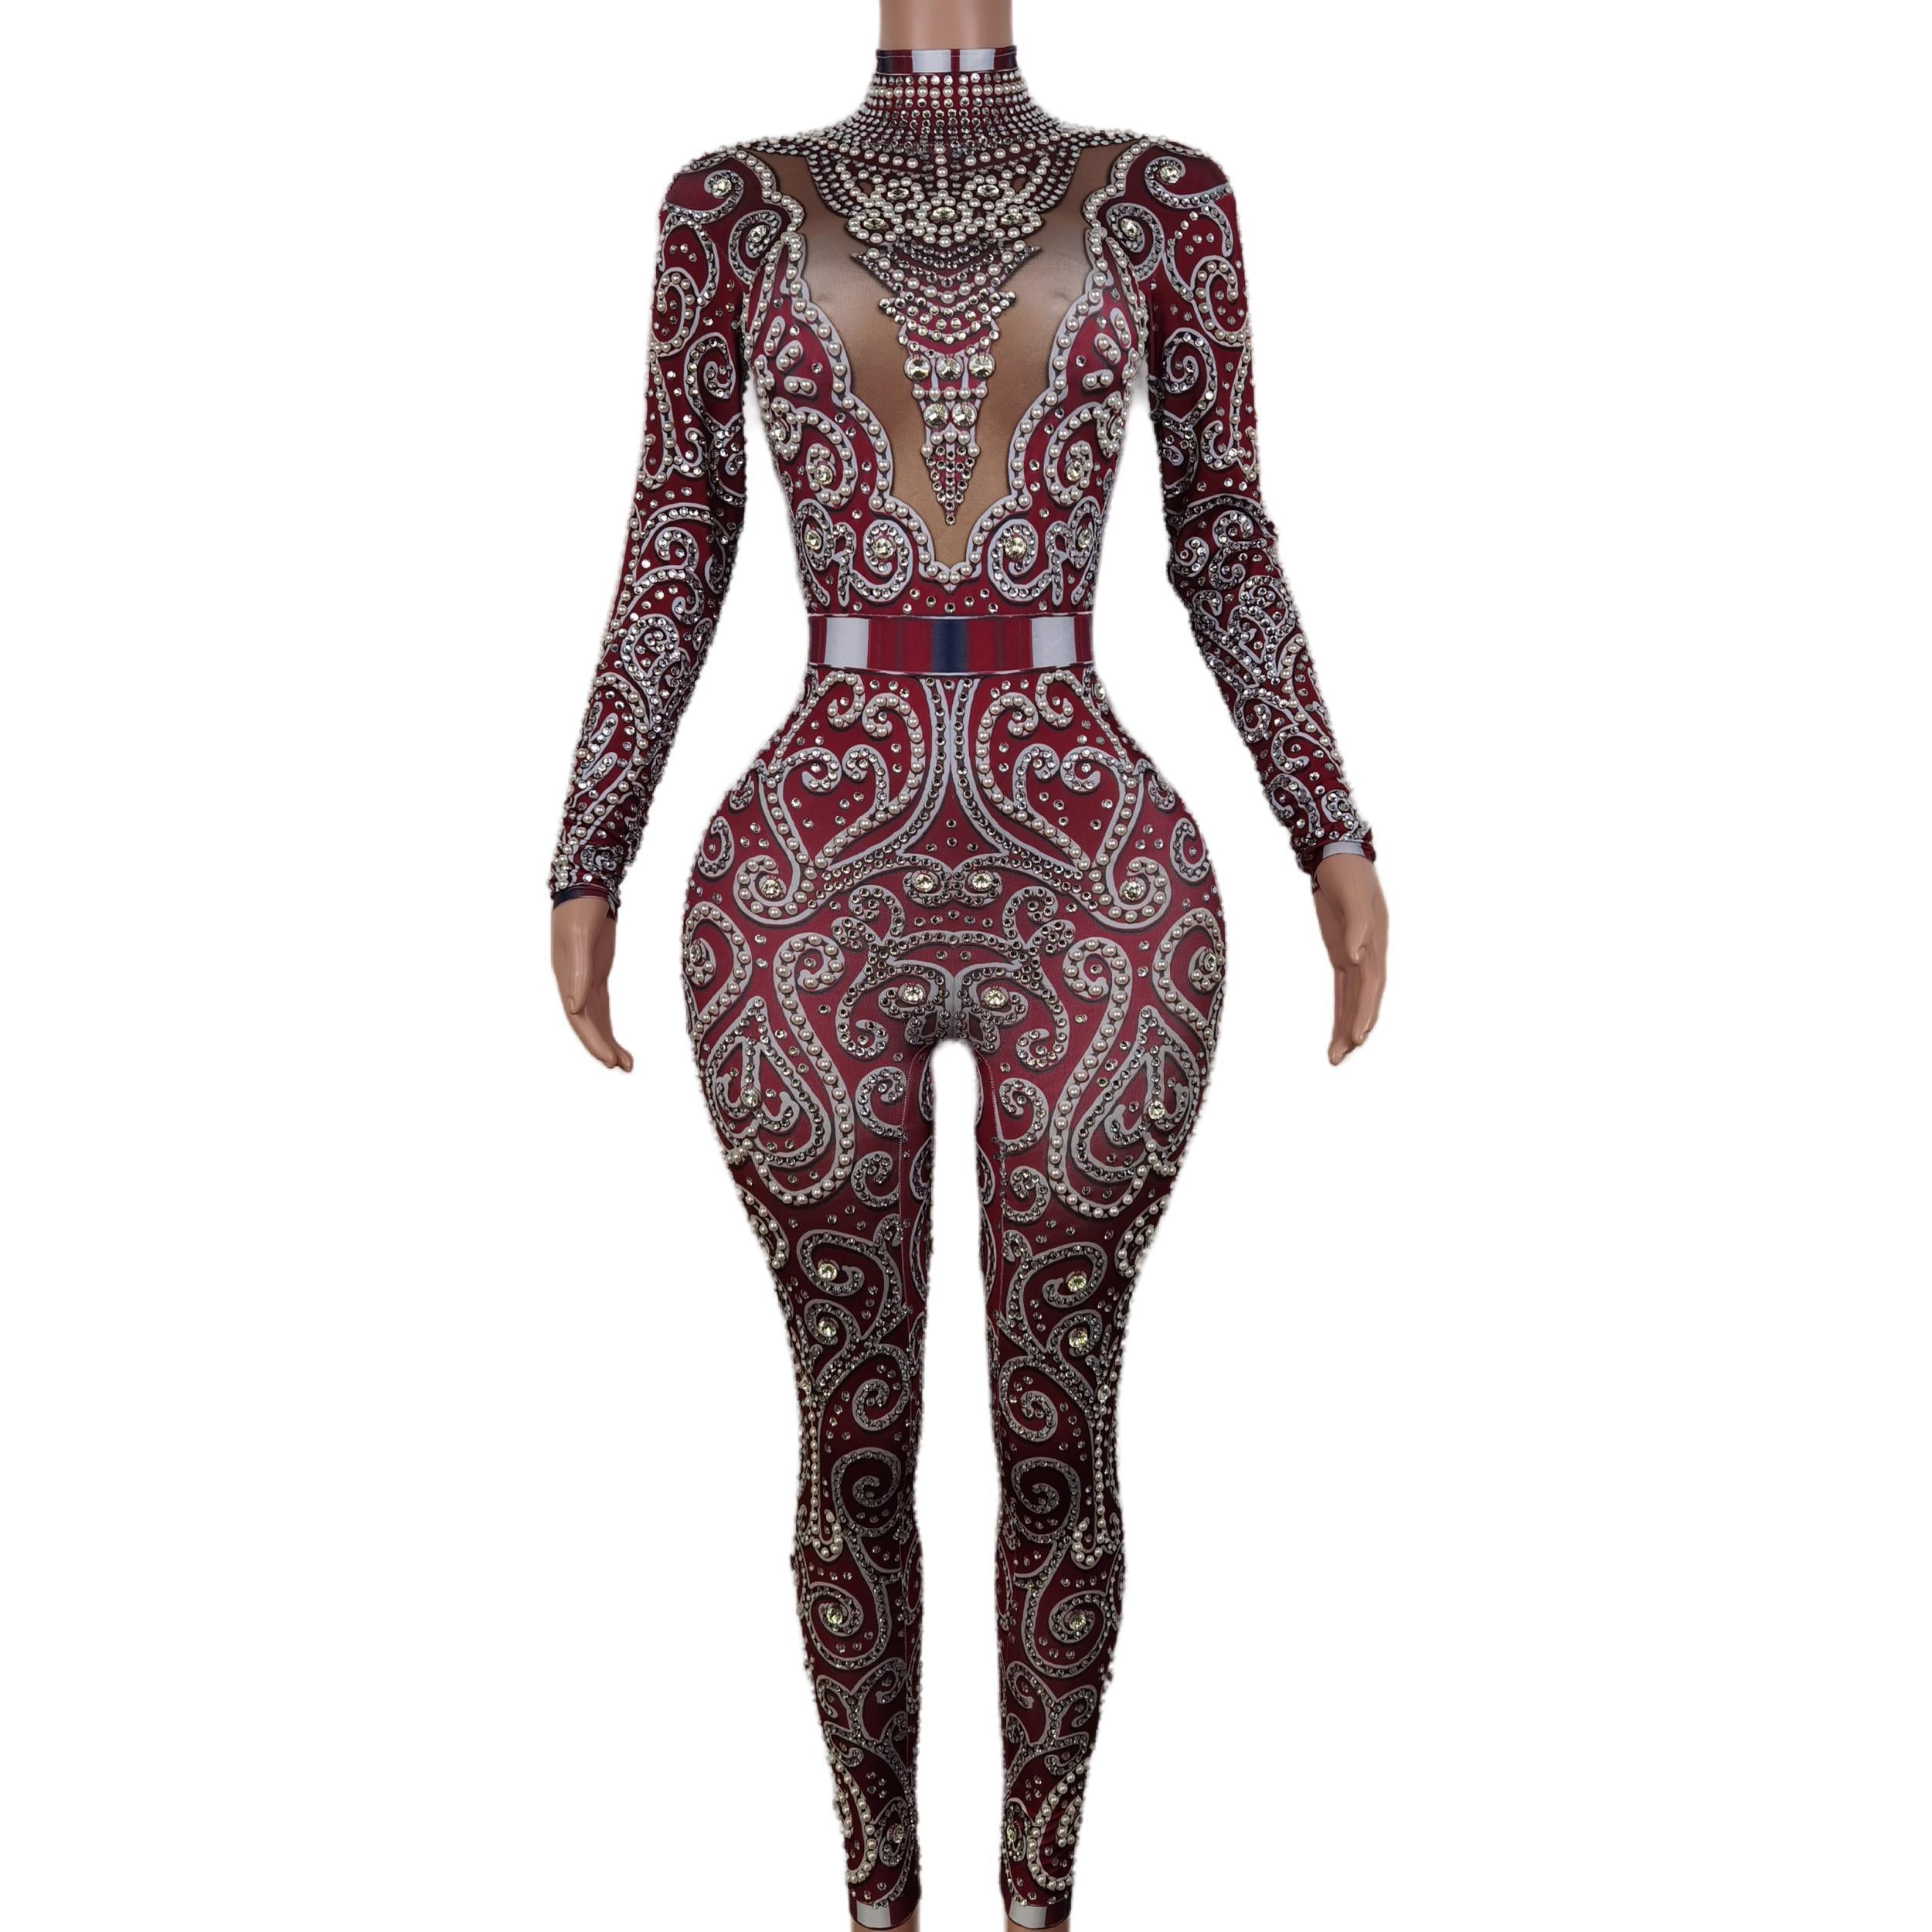 Carnival One Piece Jumpsuit for Women Sexy Romper Glitter Crystal Pole Dance Costume Nightclub Bar Stage Wear Outfits